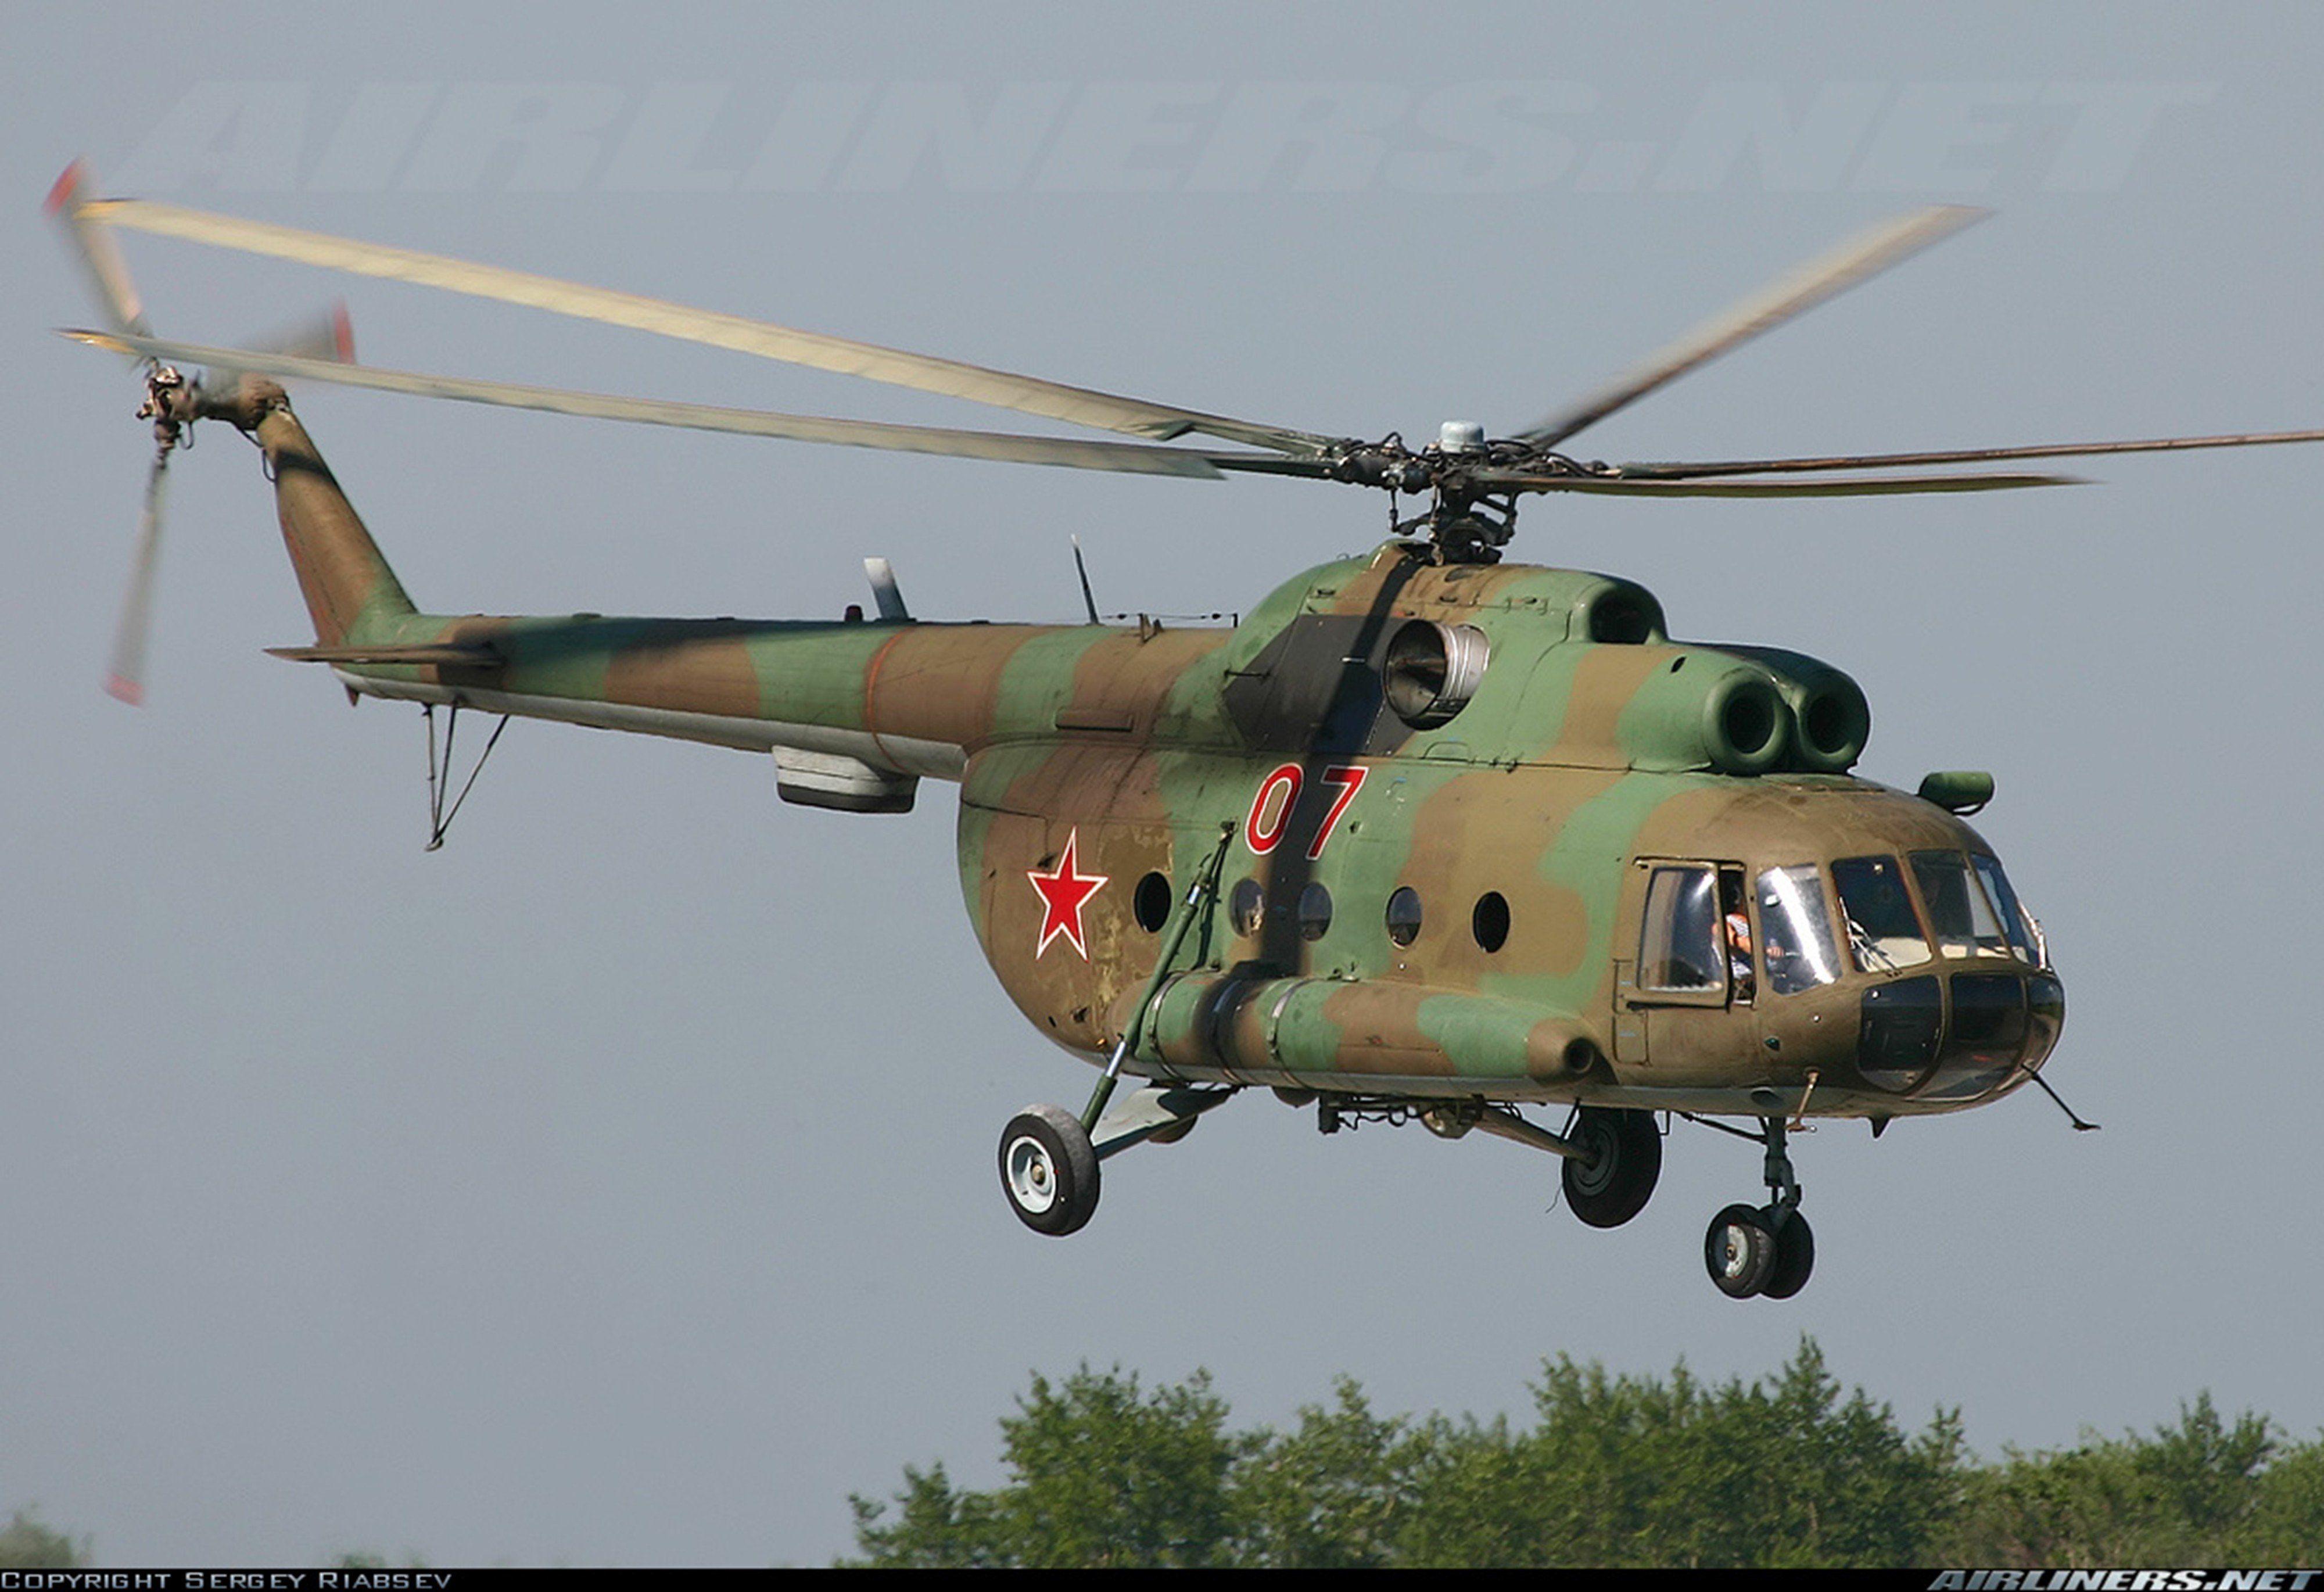 Russian Red Star Russia Helicopter Aircraft Vehicle Military Army